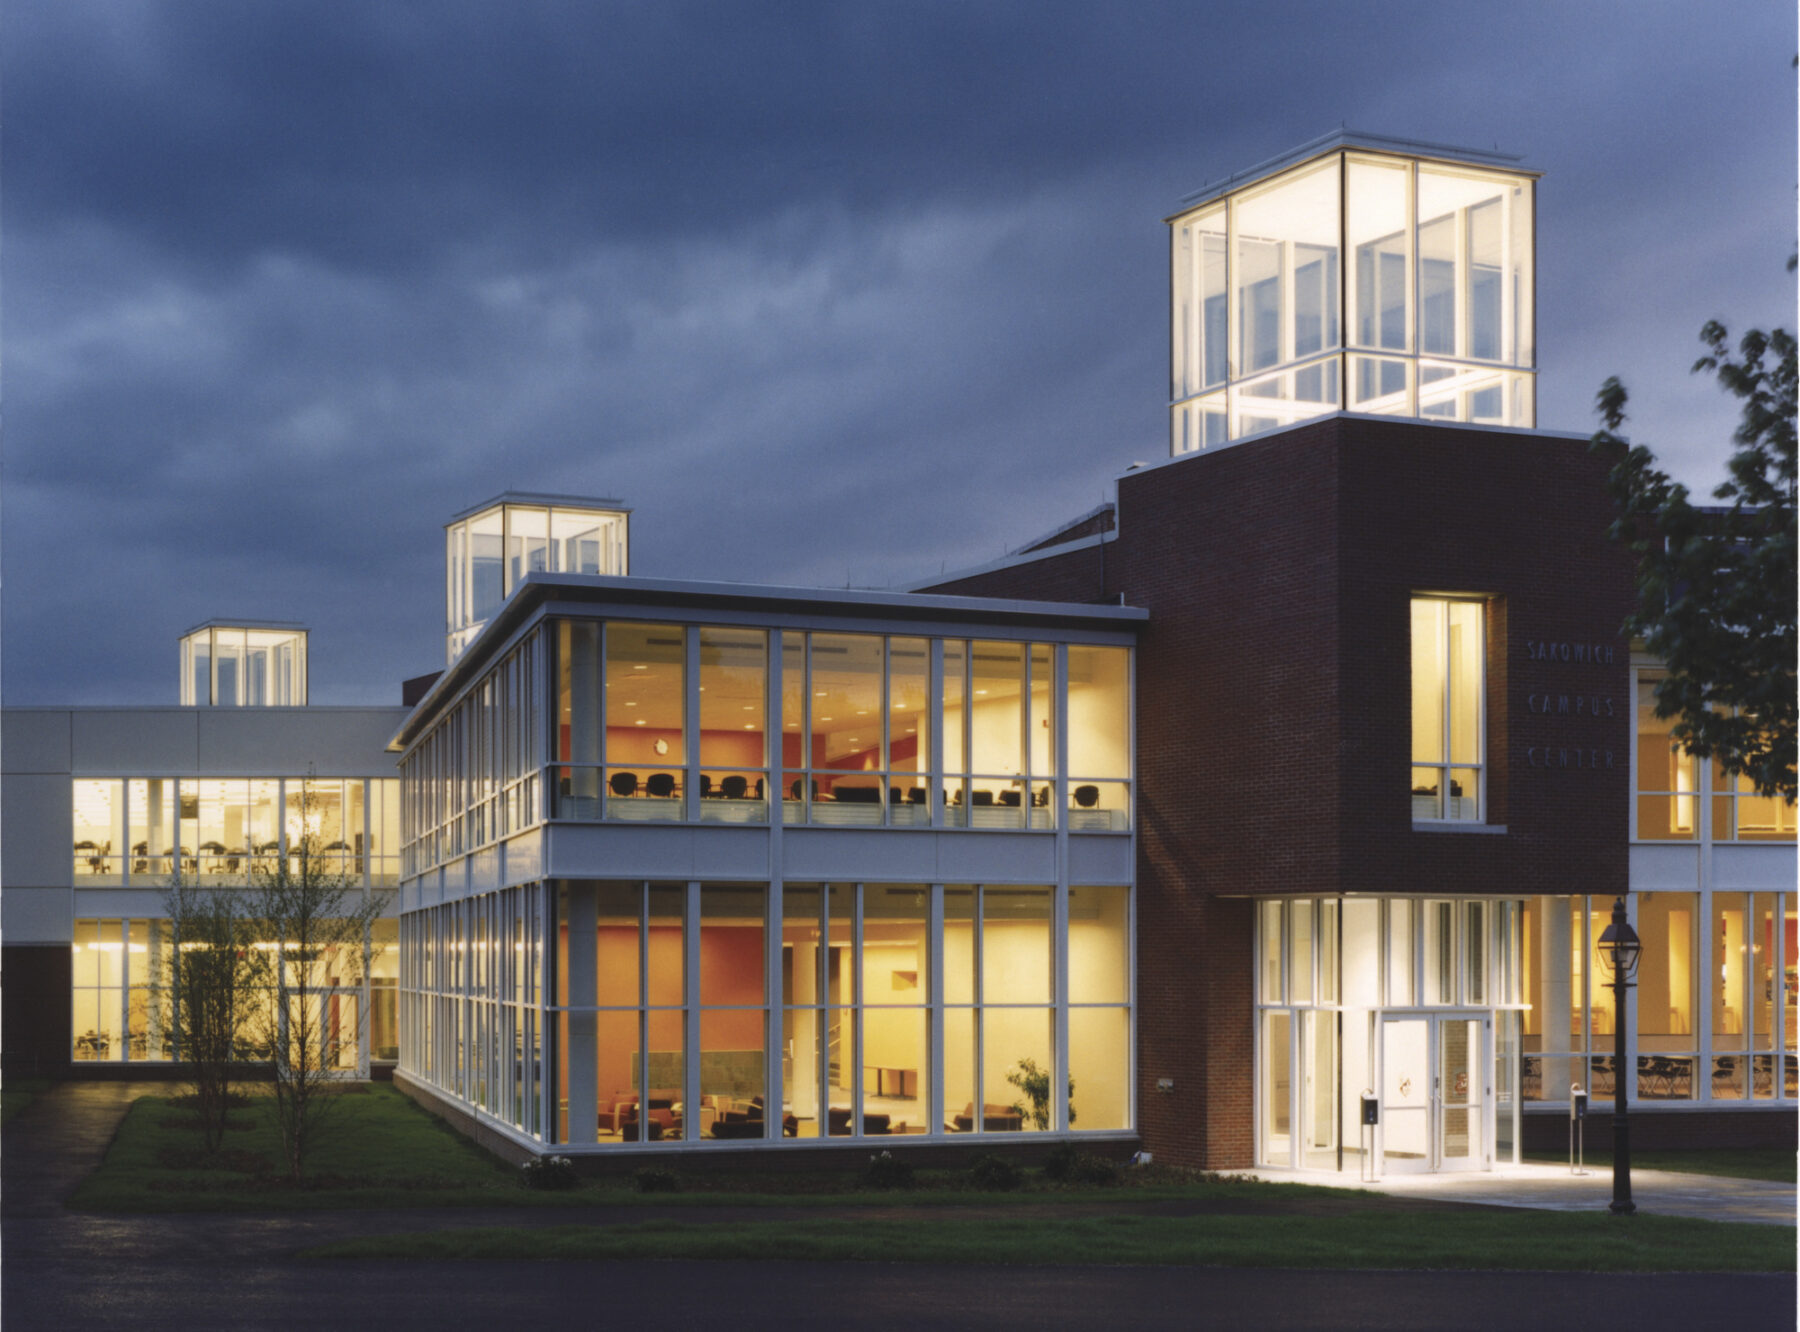 Color photo of a two level campus center, exterior. Three lit glass volumes poke up above the main massing